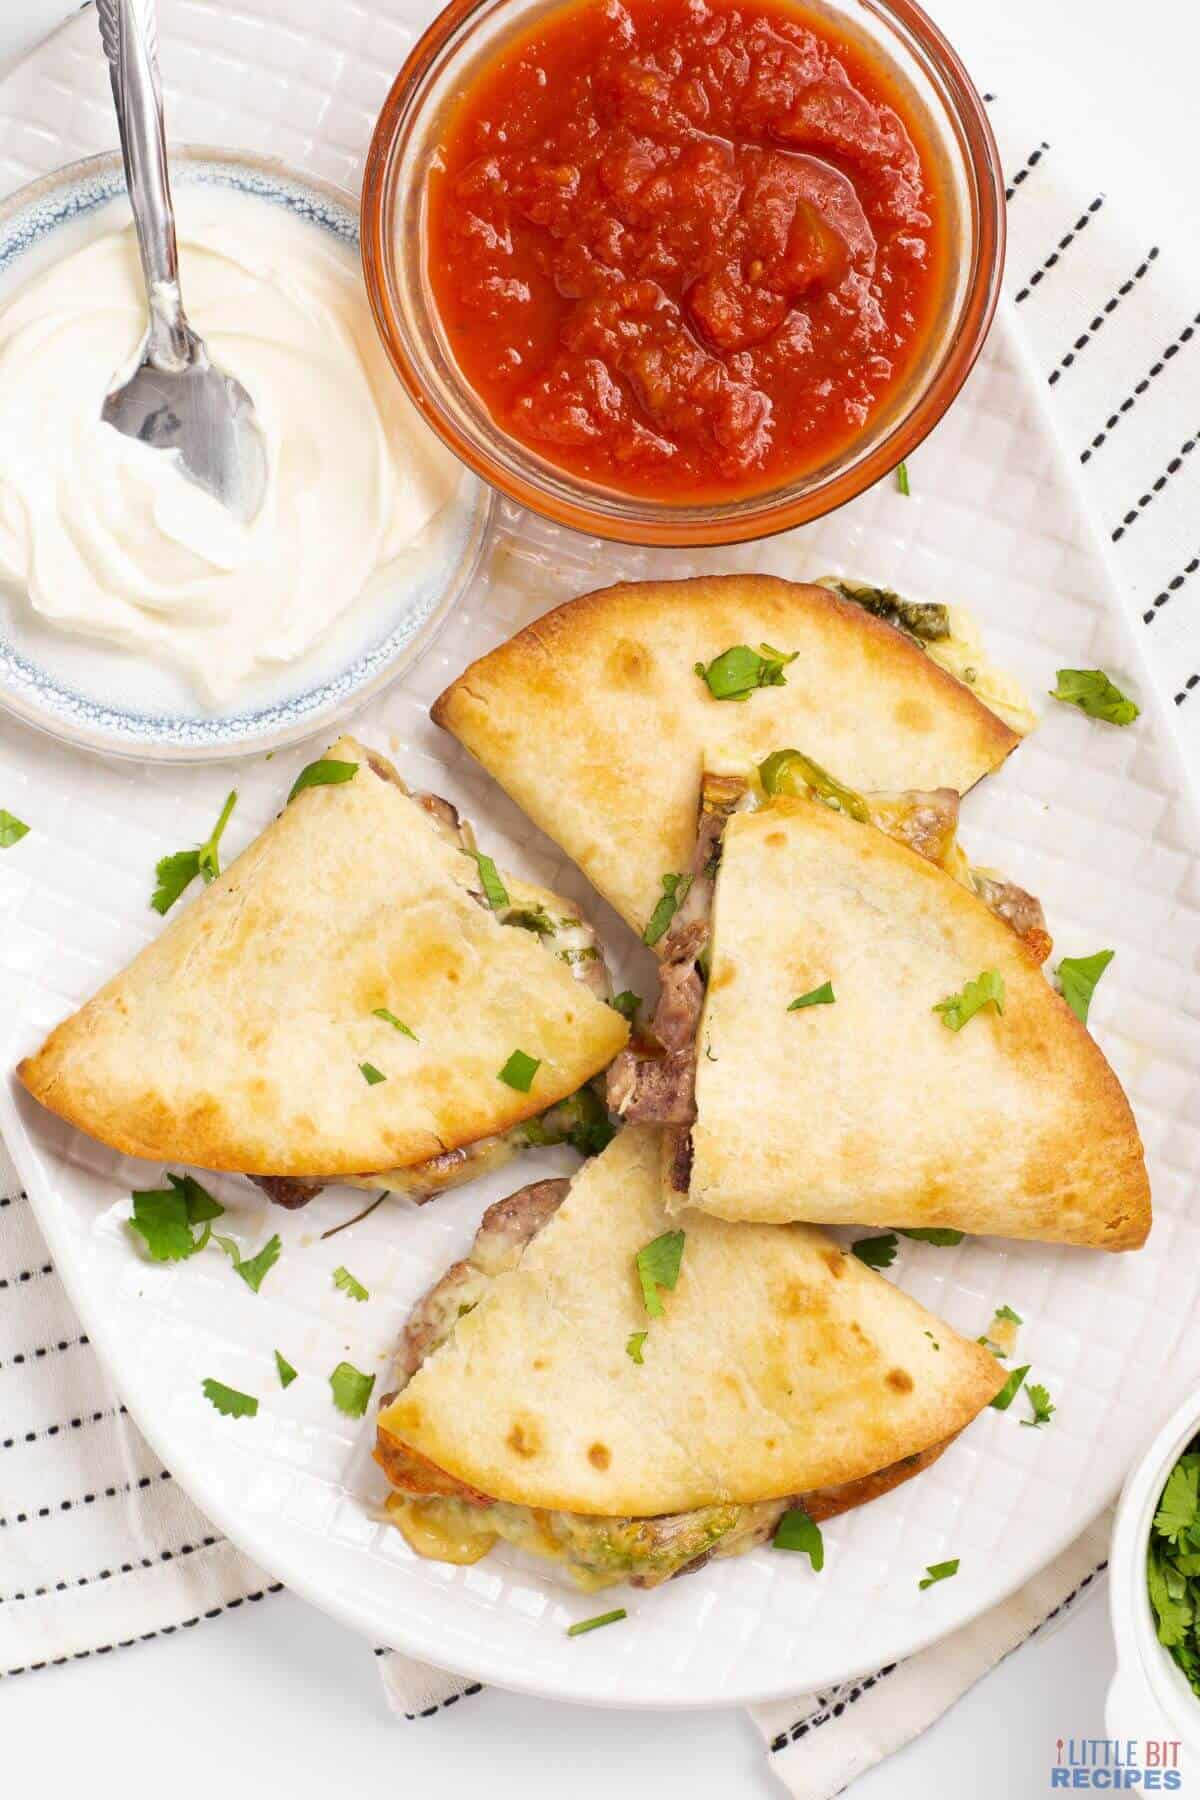 beef steak quesadillas with salsa and sour cream.